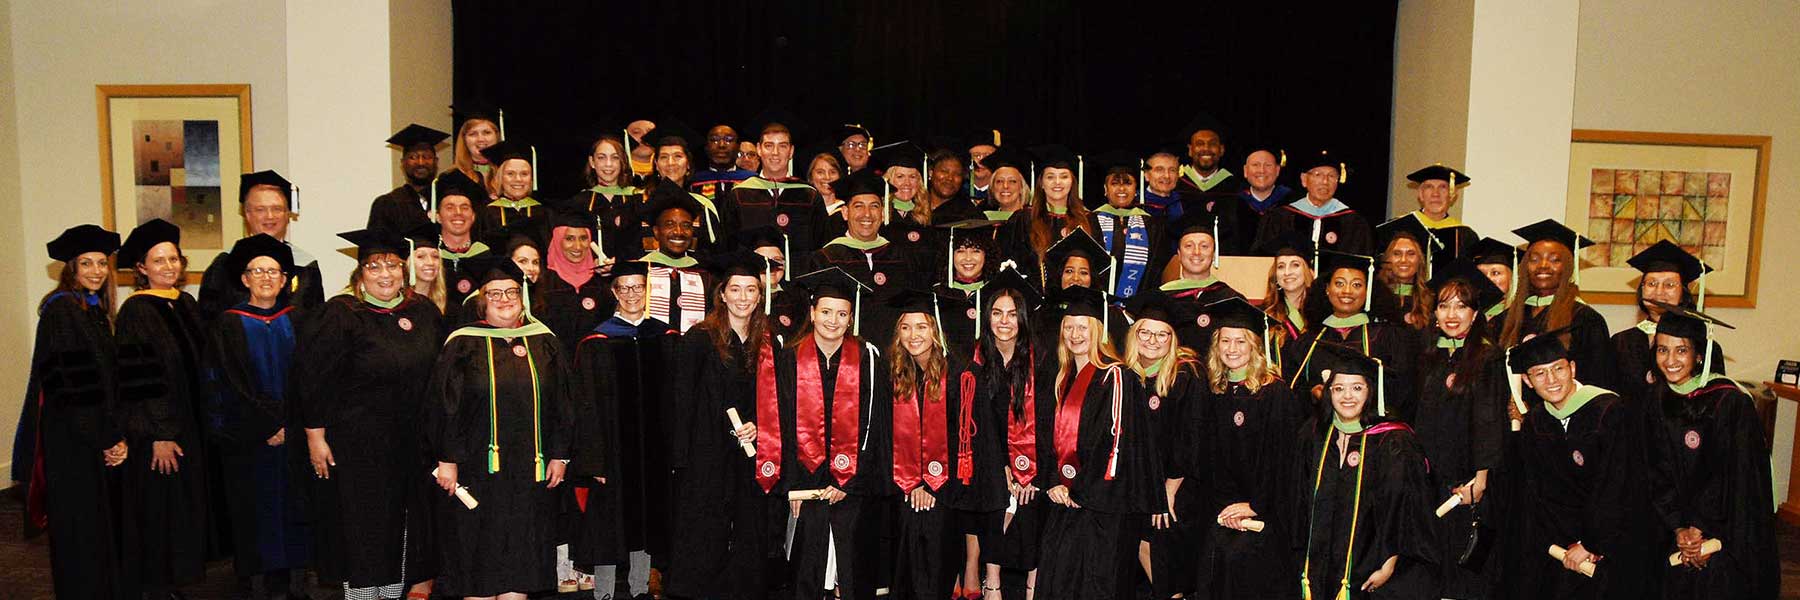 A large group of graduates pose in caps and gowns